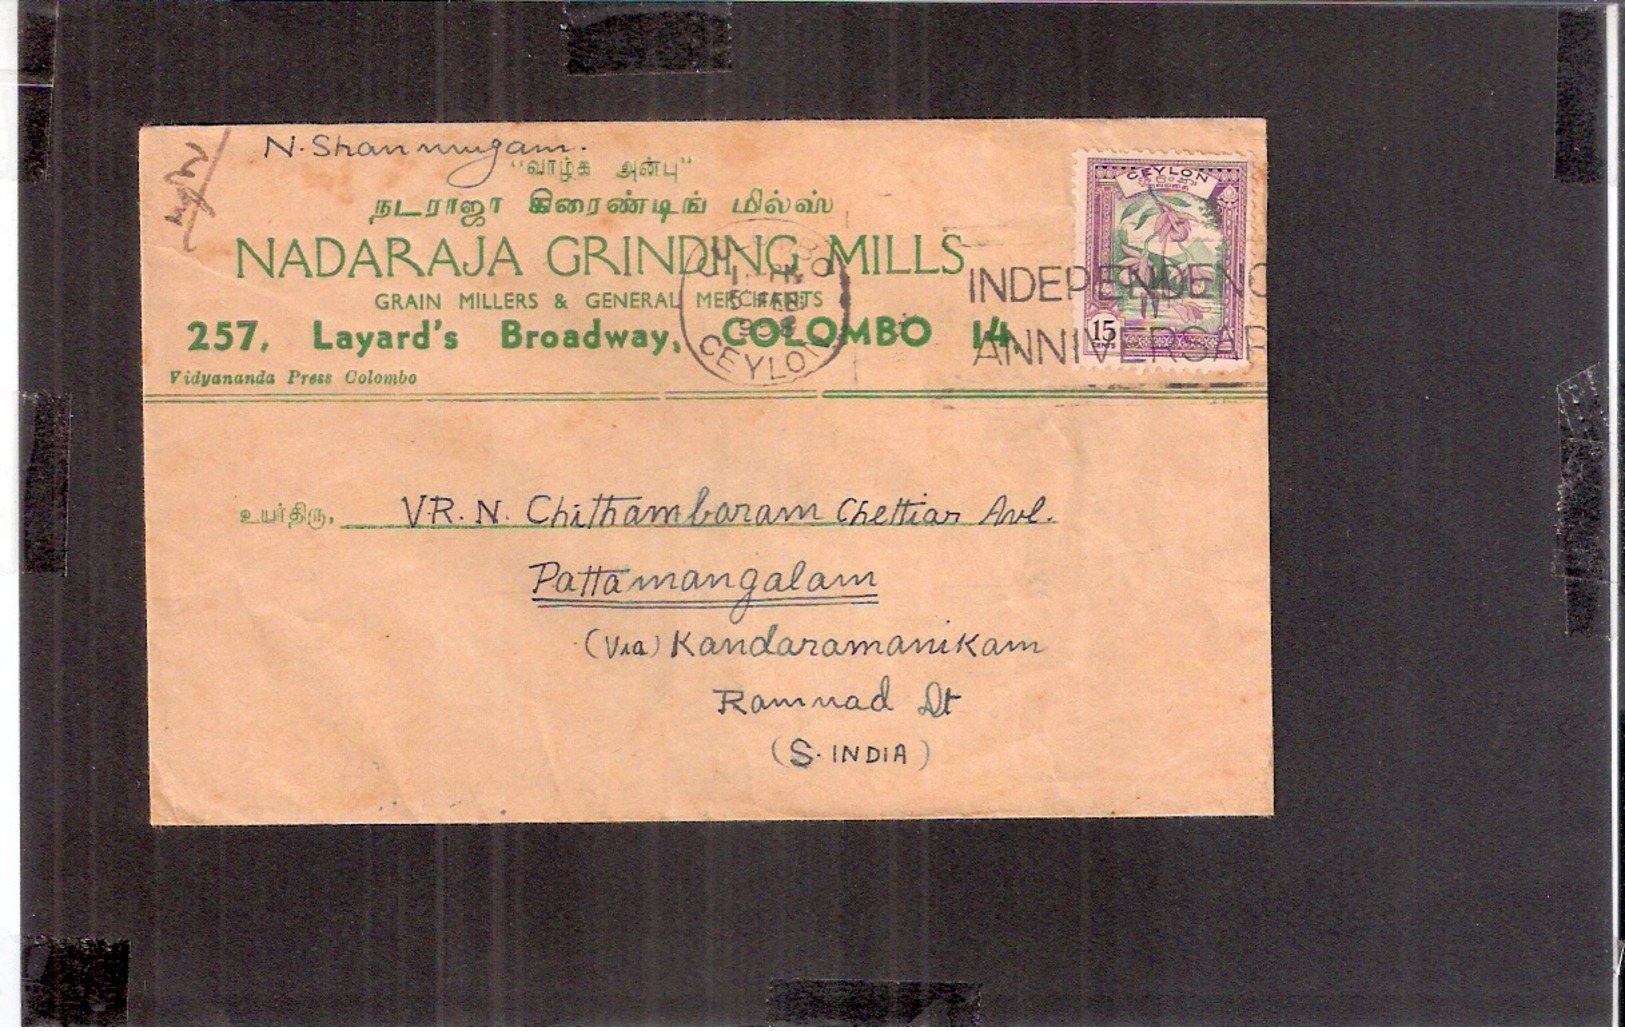 CEYLON 1956 TO INDIA COVER ADVERTISEMENT CANCELLATION 6579 COLOMBO TO RAMNAD - Ceylan (...-1947)